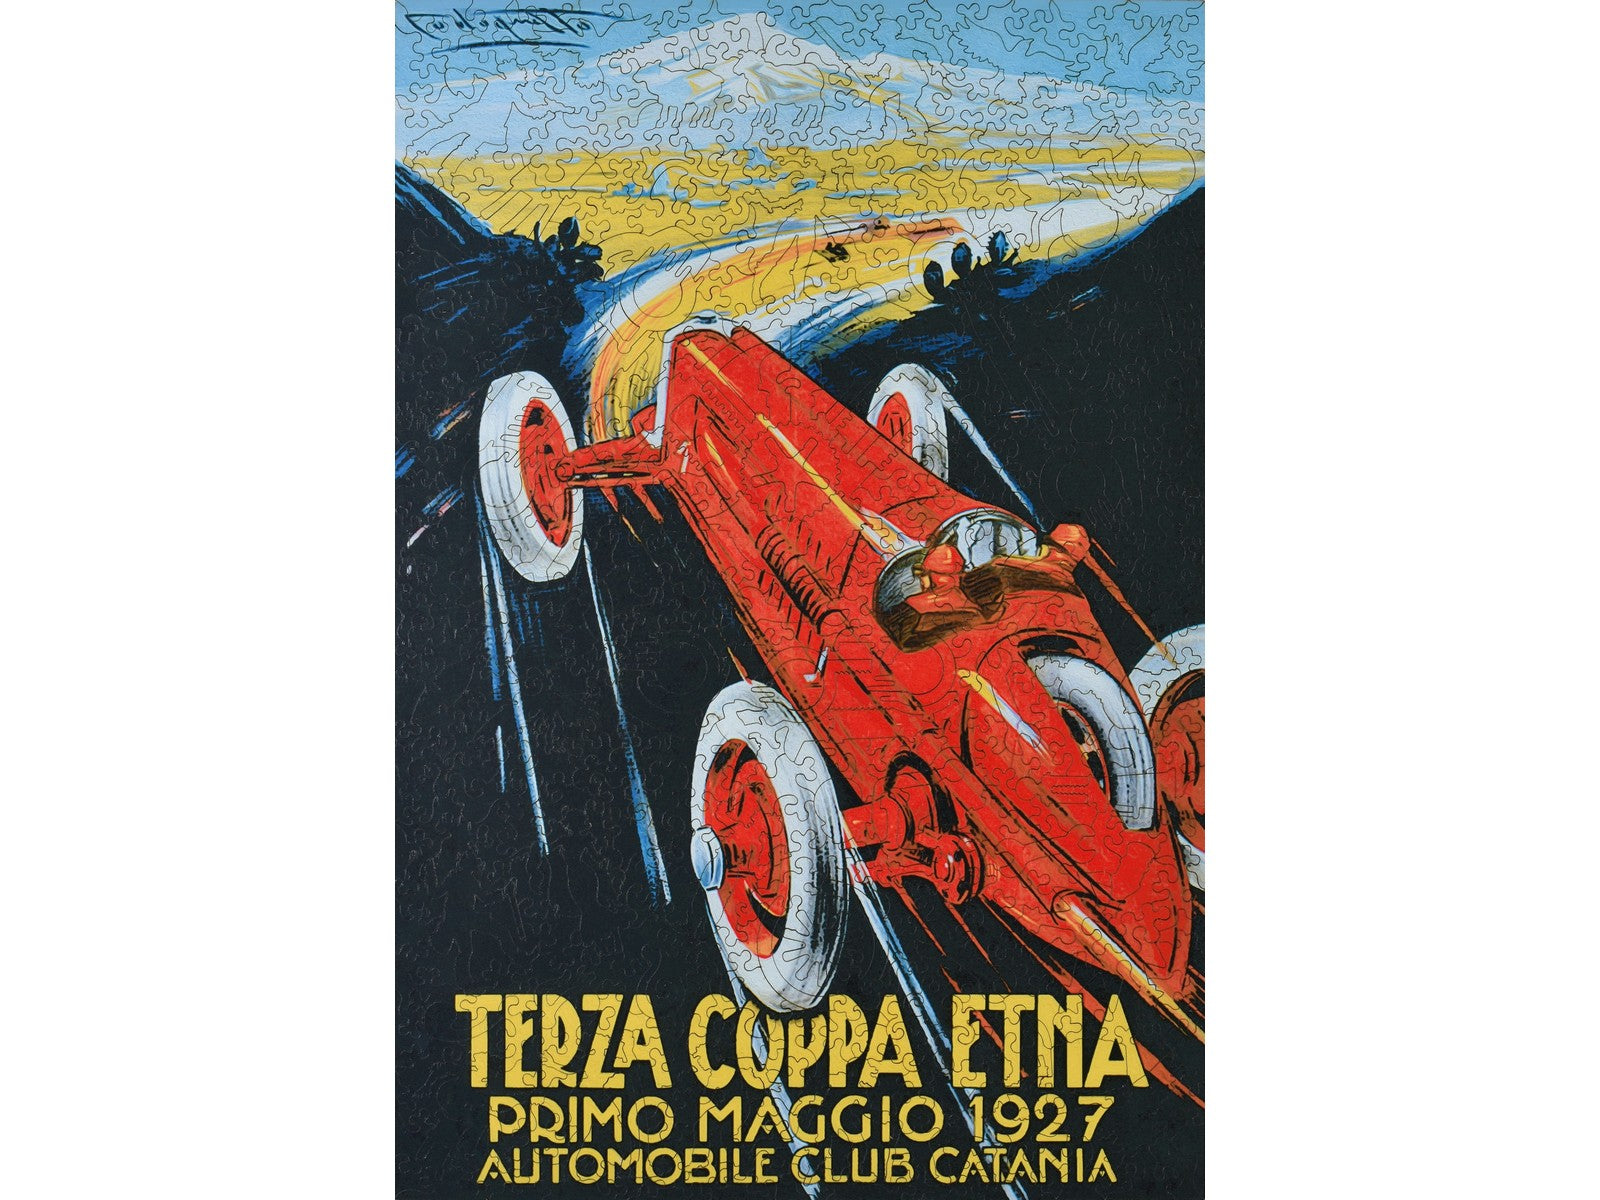 Terza Coppa Etna Wooden Jigsaw Puzzle